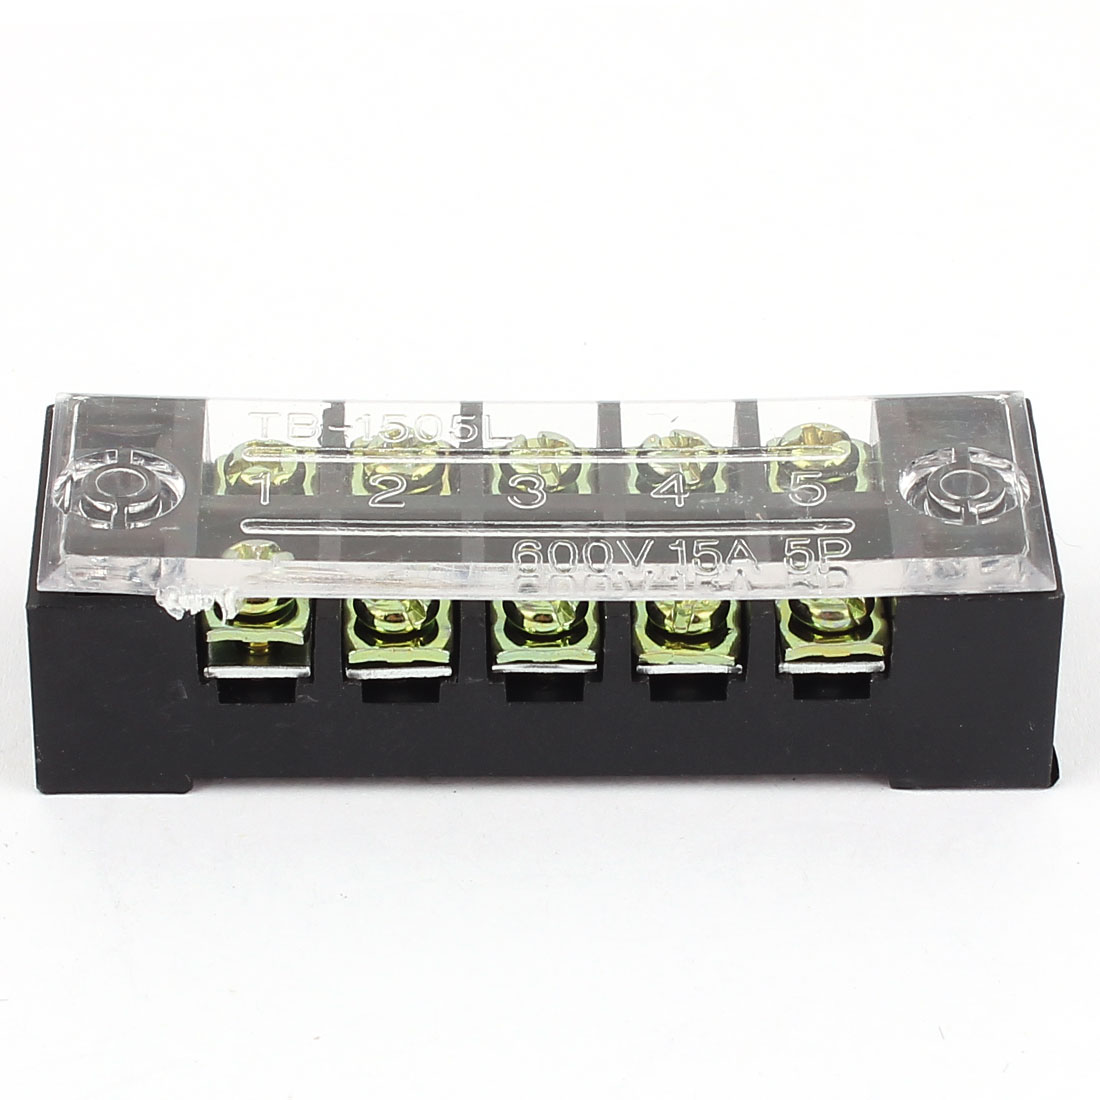 2pcs 600V 15A 5P Dual Row Electric Barrier Terminal Block Cable Connector Bar - image 2 of 4